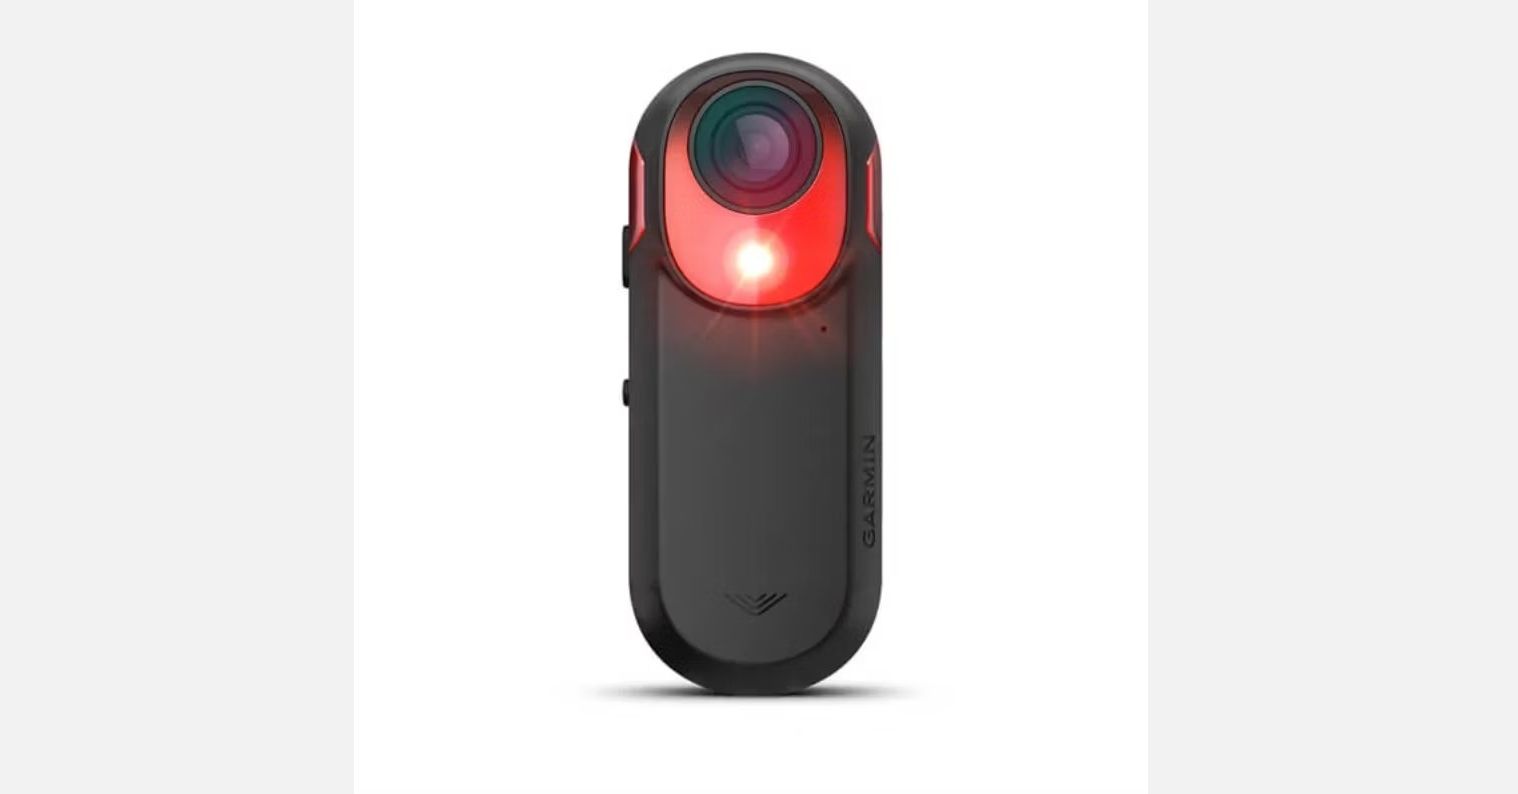 Product shot of the Garmin rear tail light and camera